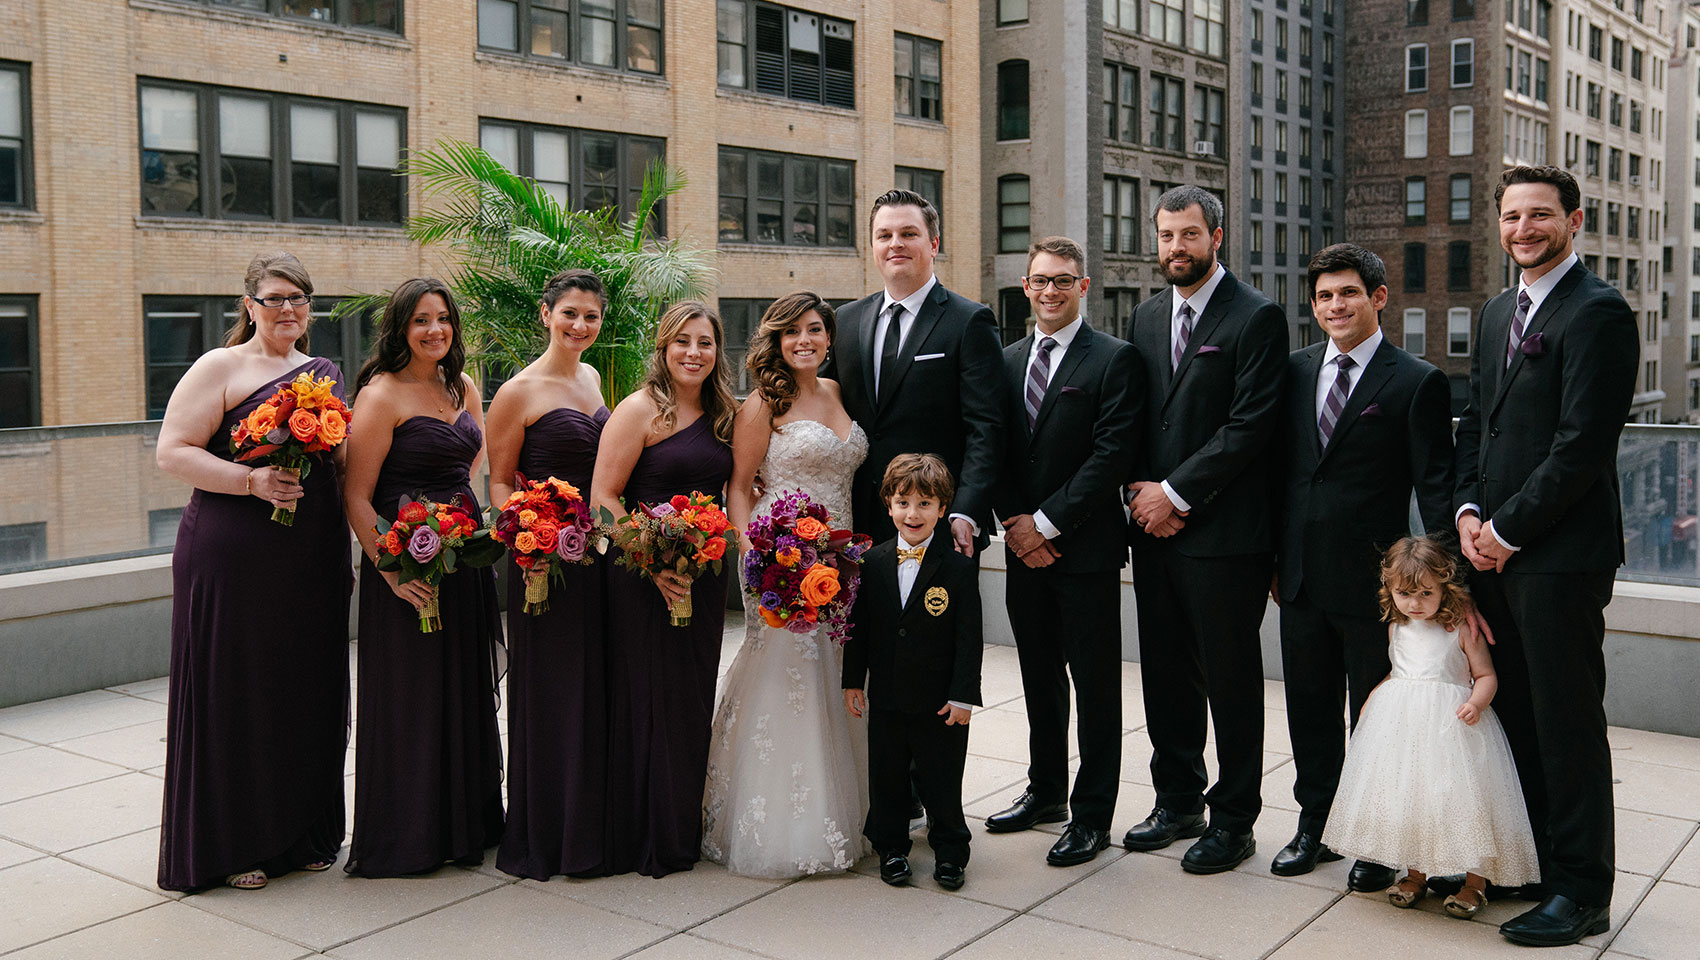 April and Daniel with their bridesmaids and groomsmen and two young children